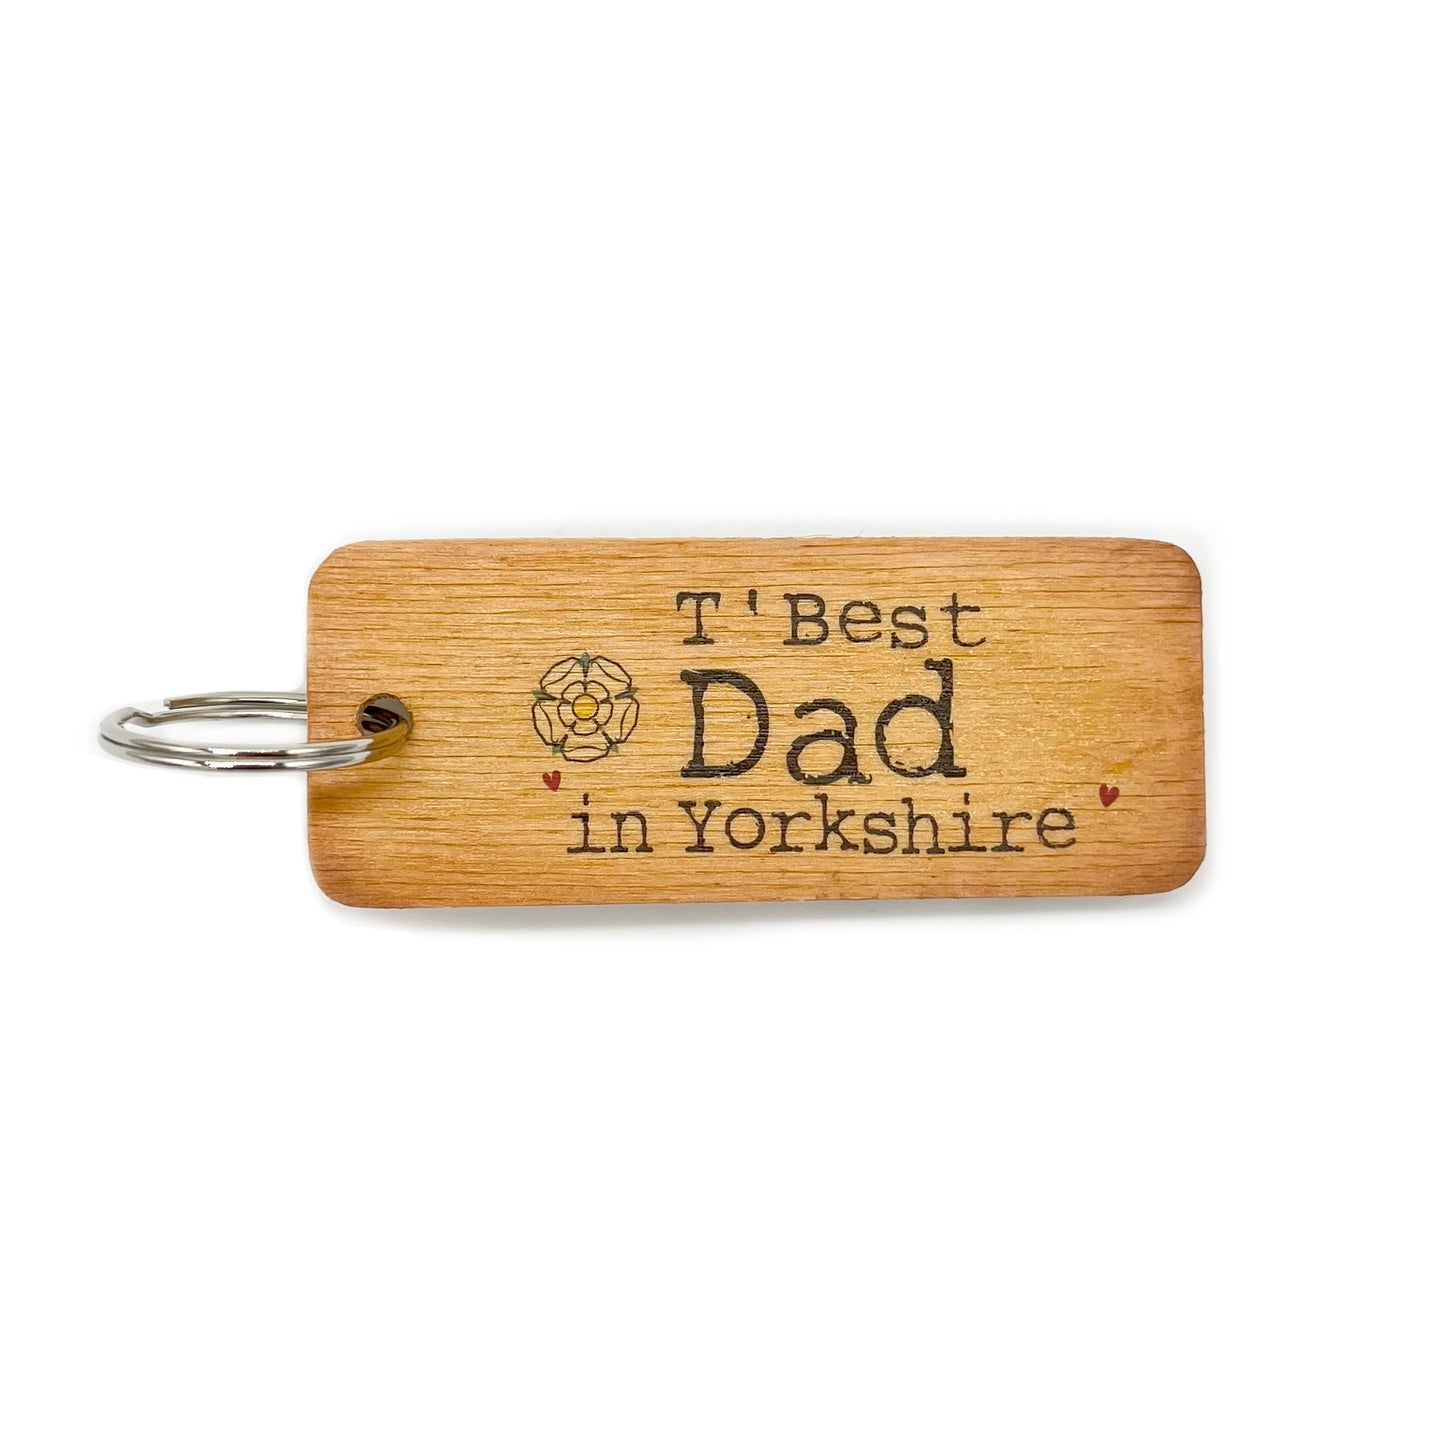 T'Best Dad in Yorkshire Rustic Wooden Keyring - The Great Yorkshire Shop